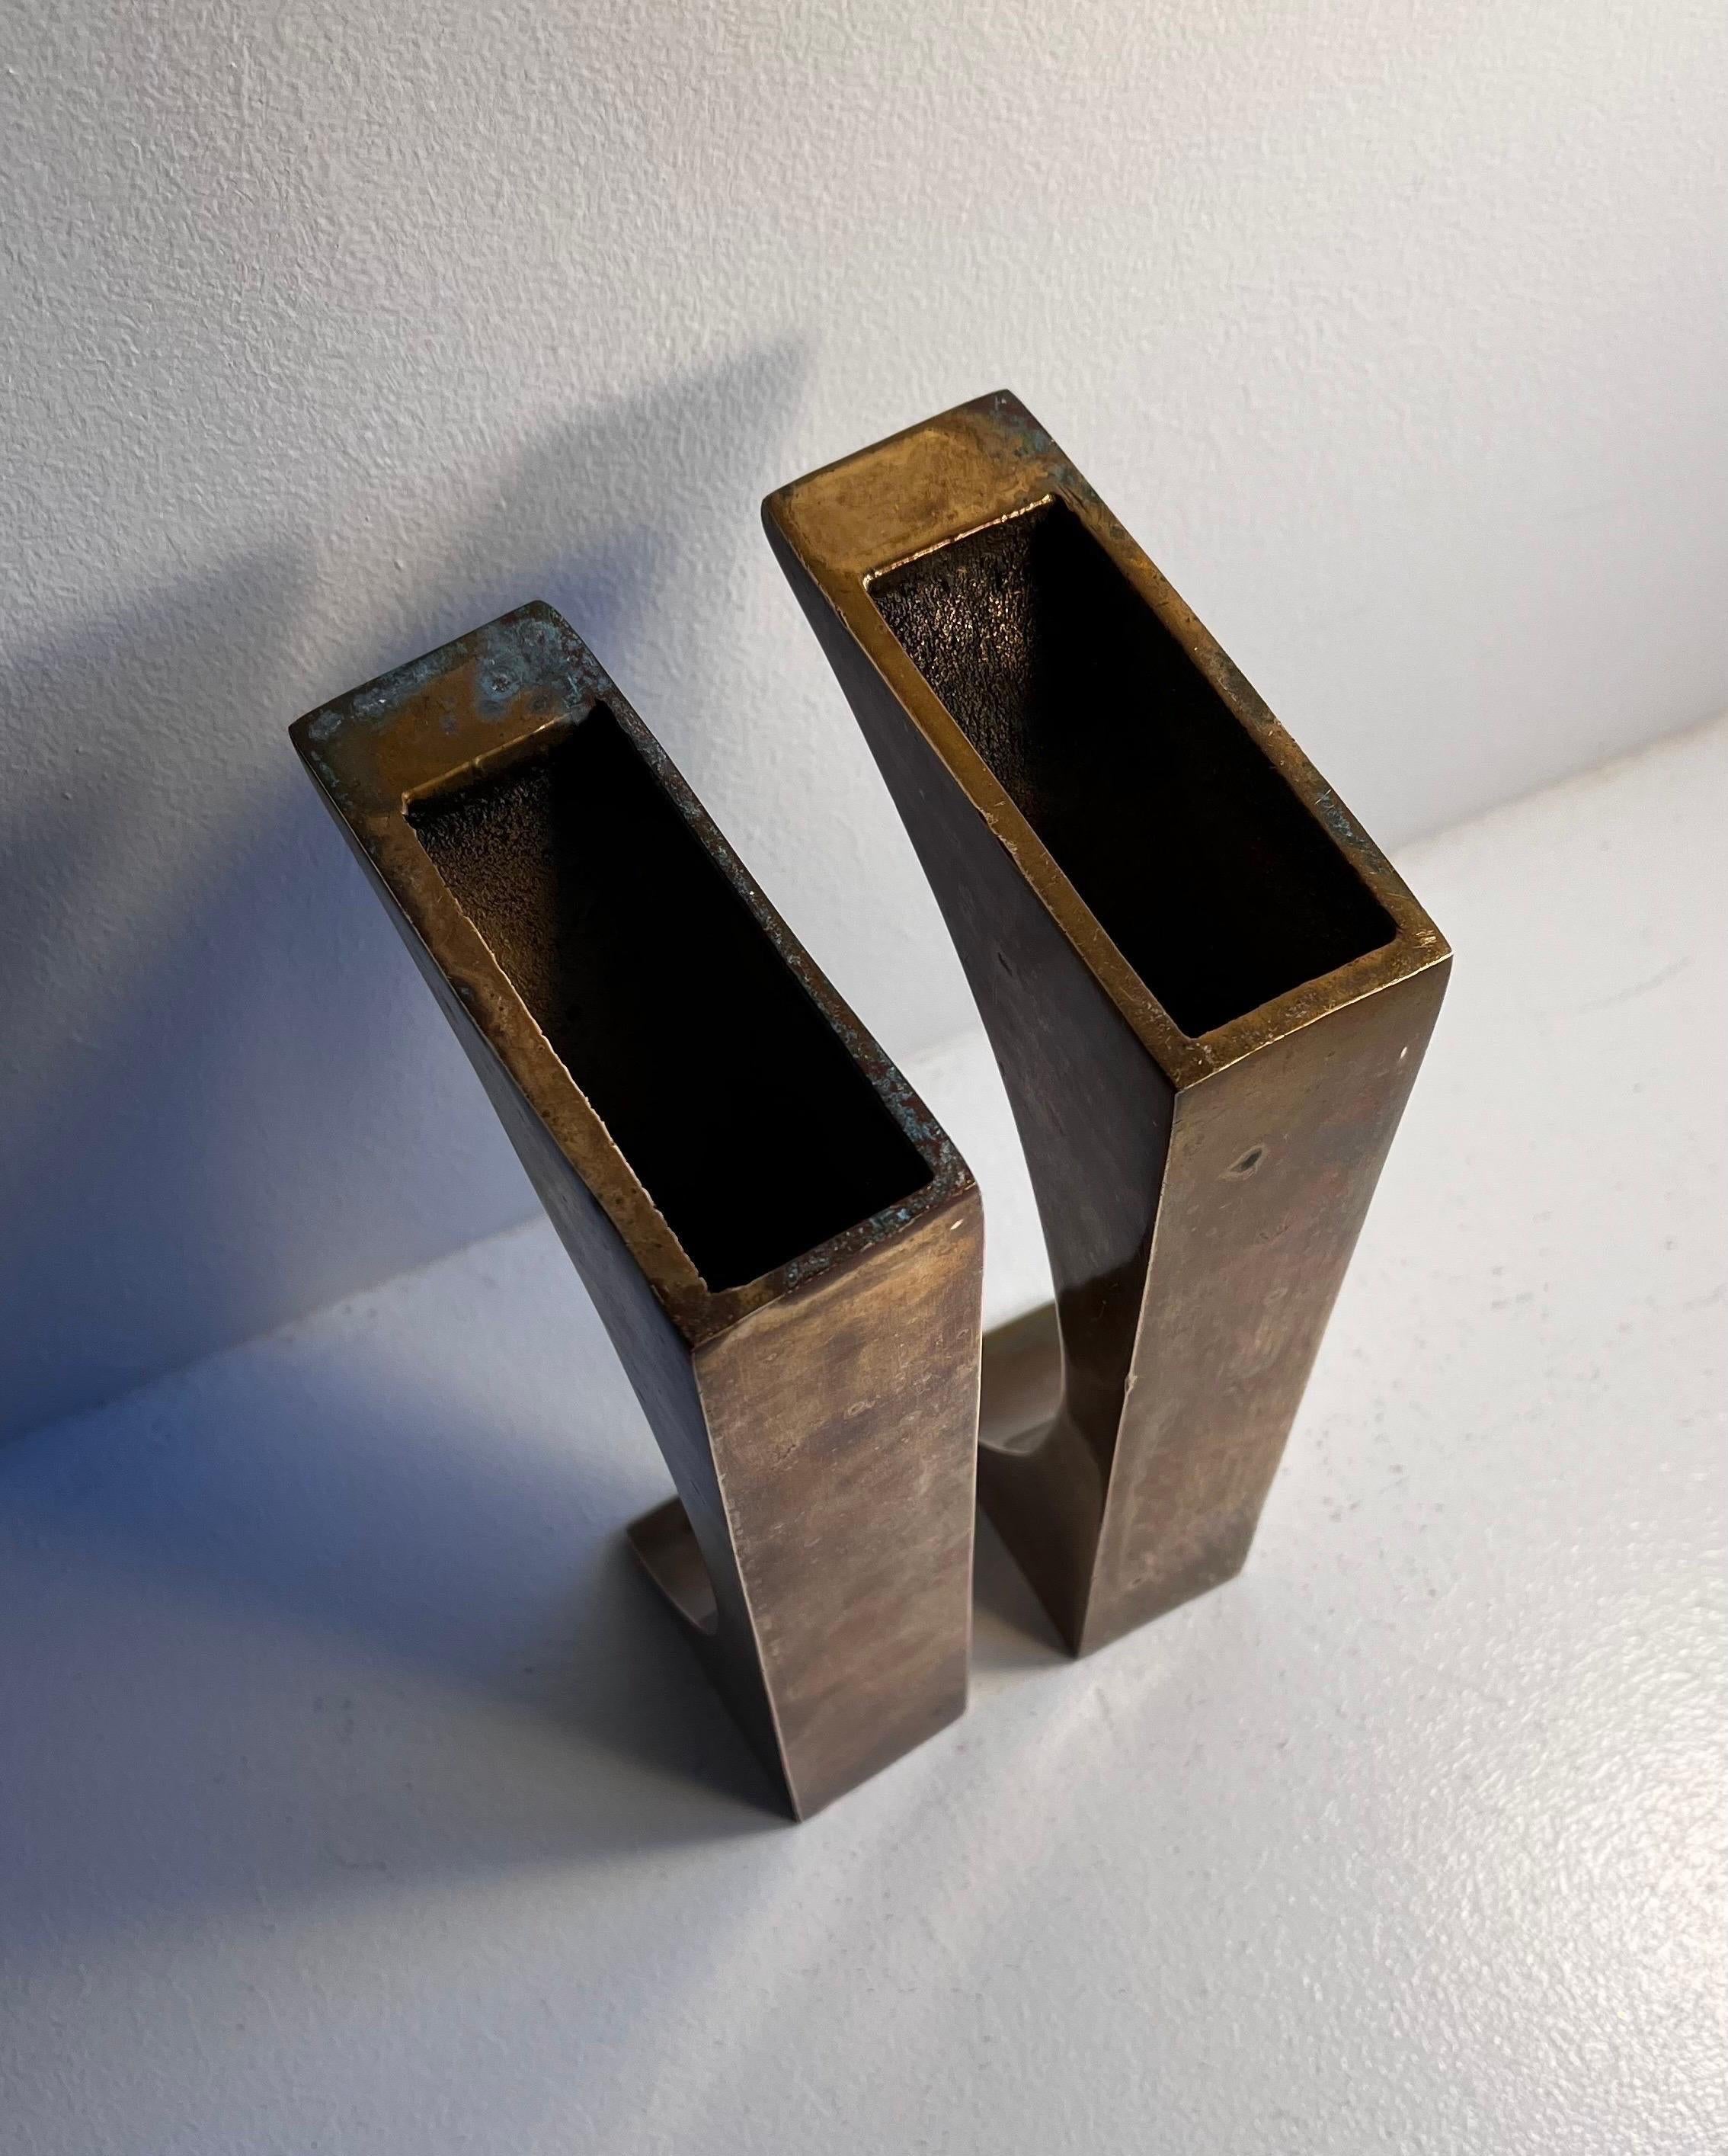 Pair of  Bronze Candlesticks or Bookends in the style M. Gerber, c 1970 For Sale 7